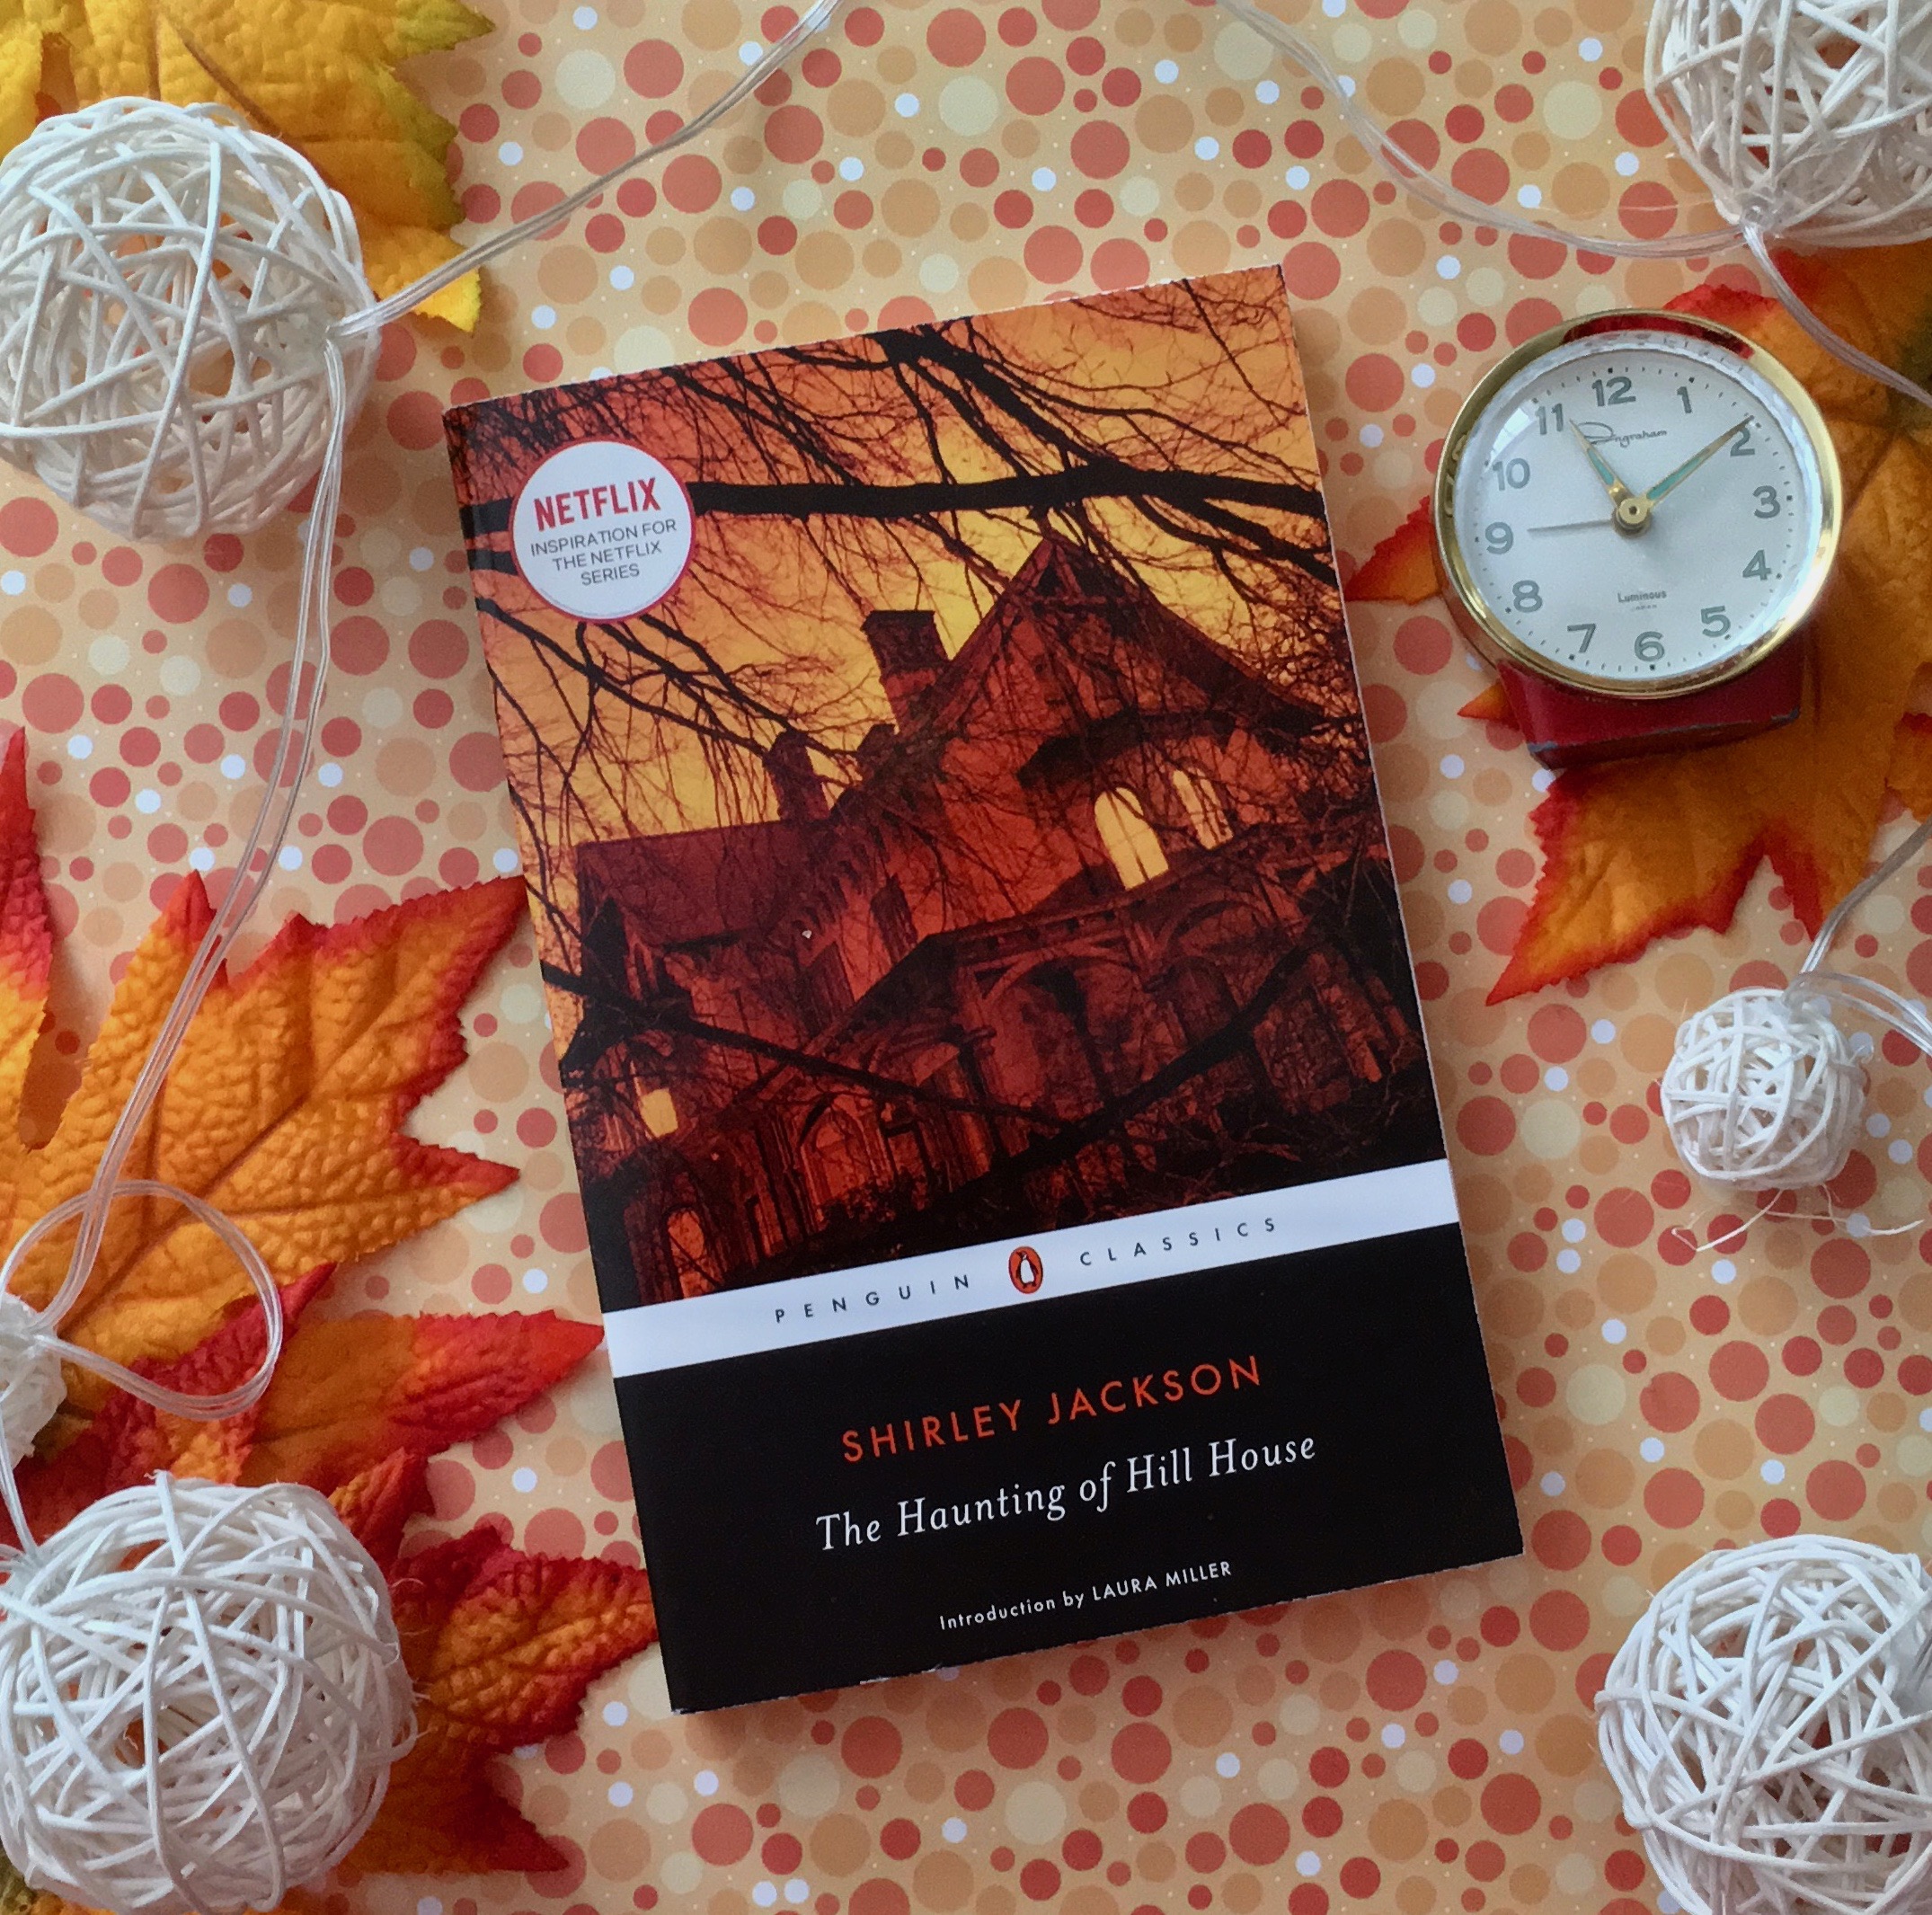 The Haunting of Hill House by Shirley Jackson – Review